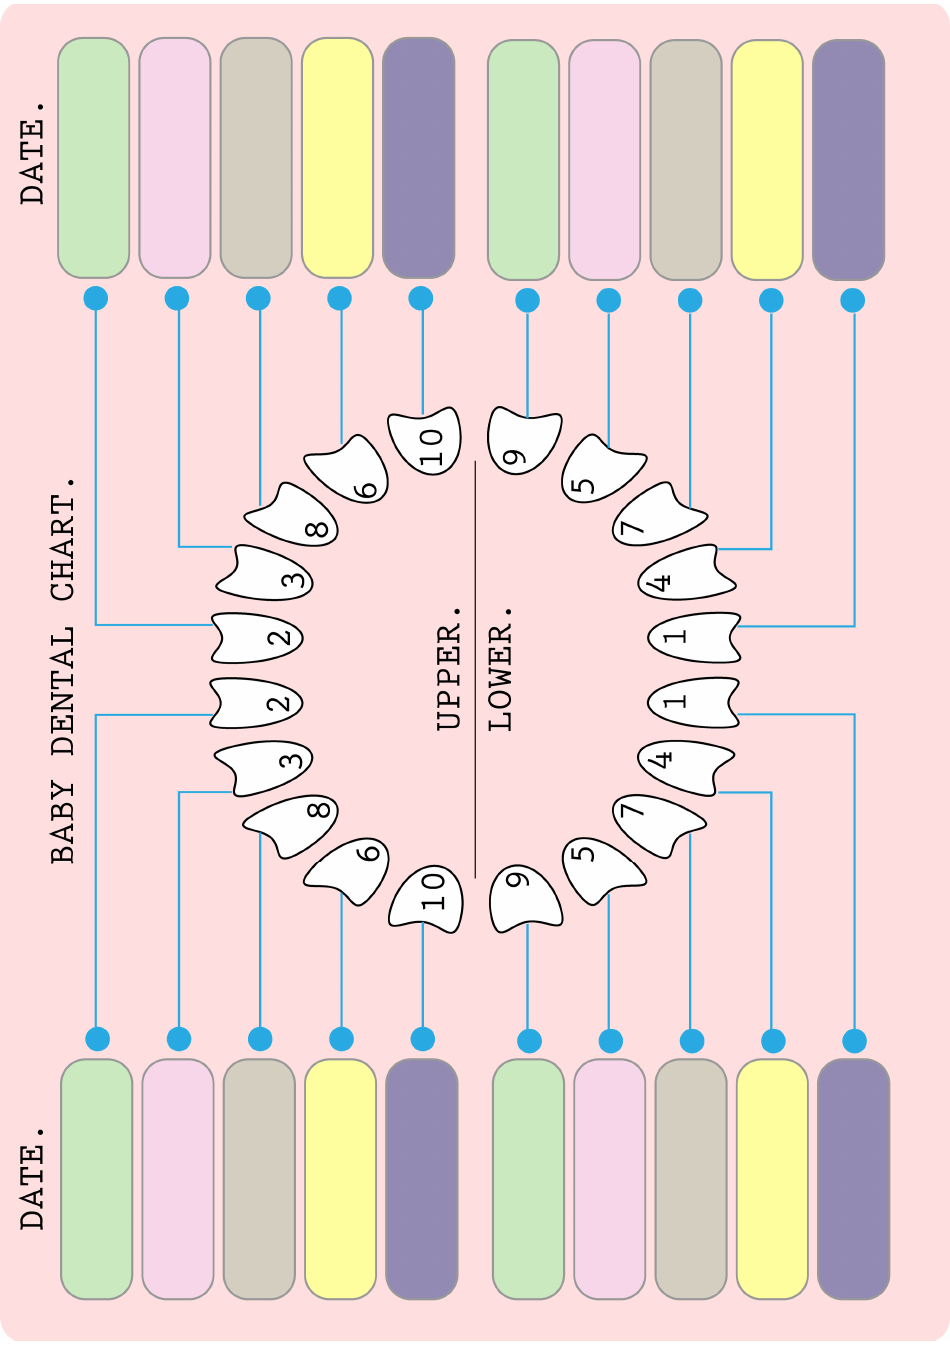 Baby Dental Chart - An Easy-to-Use Guide for Baby Teeth Development